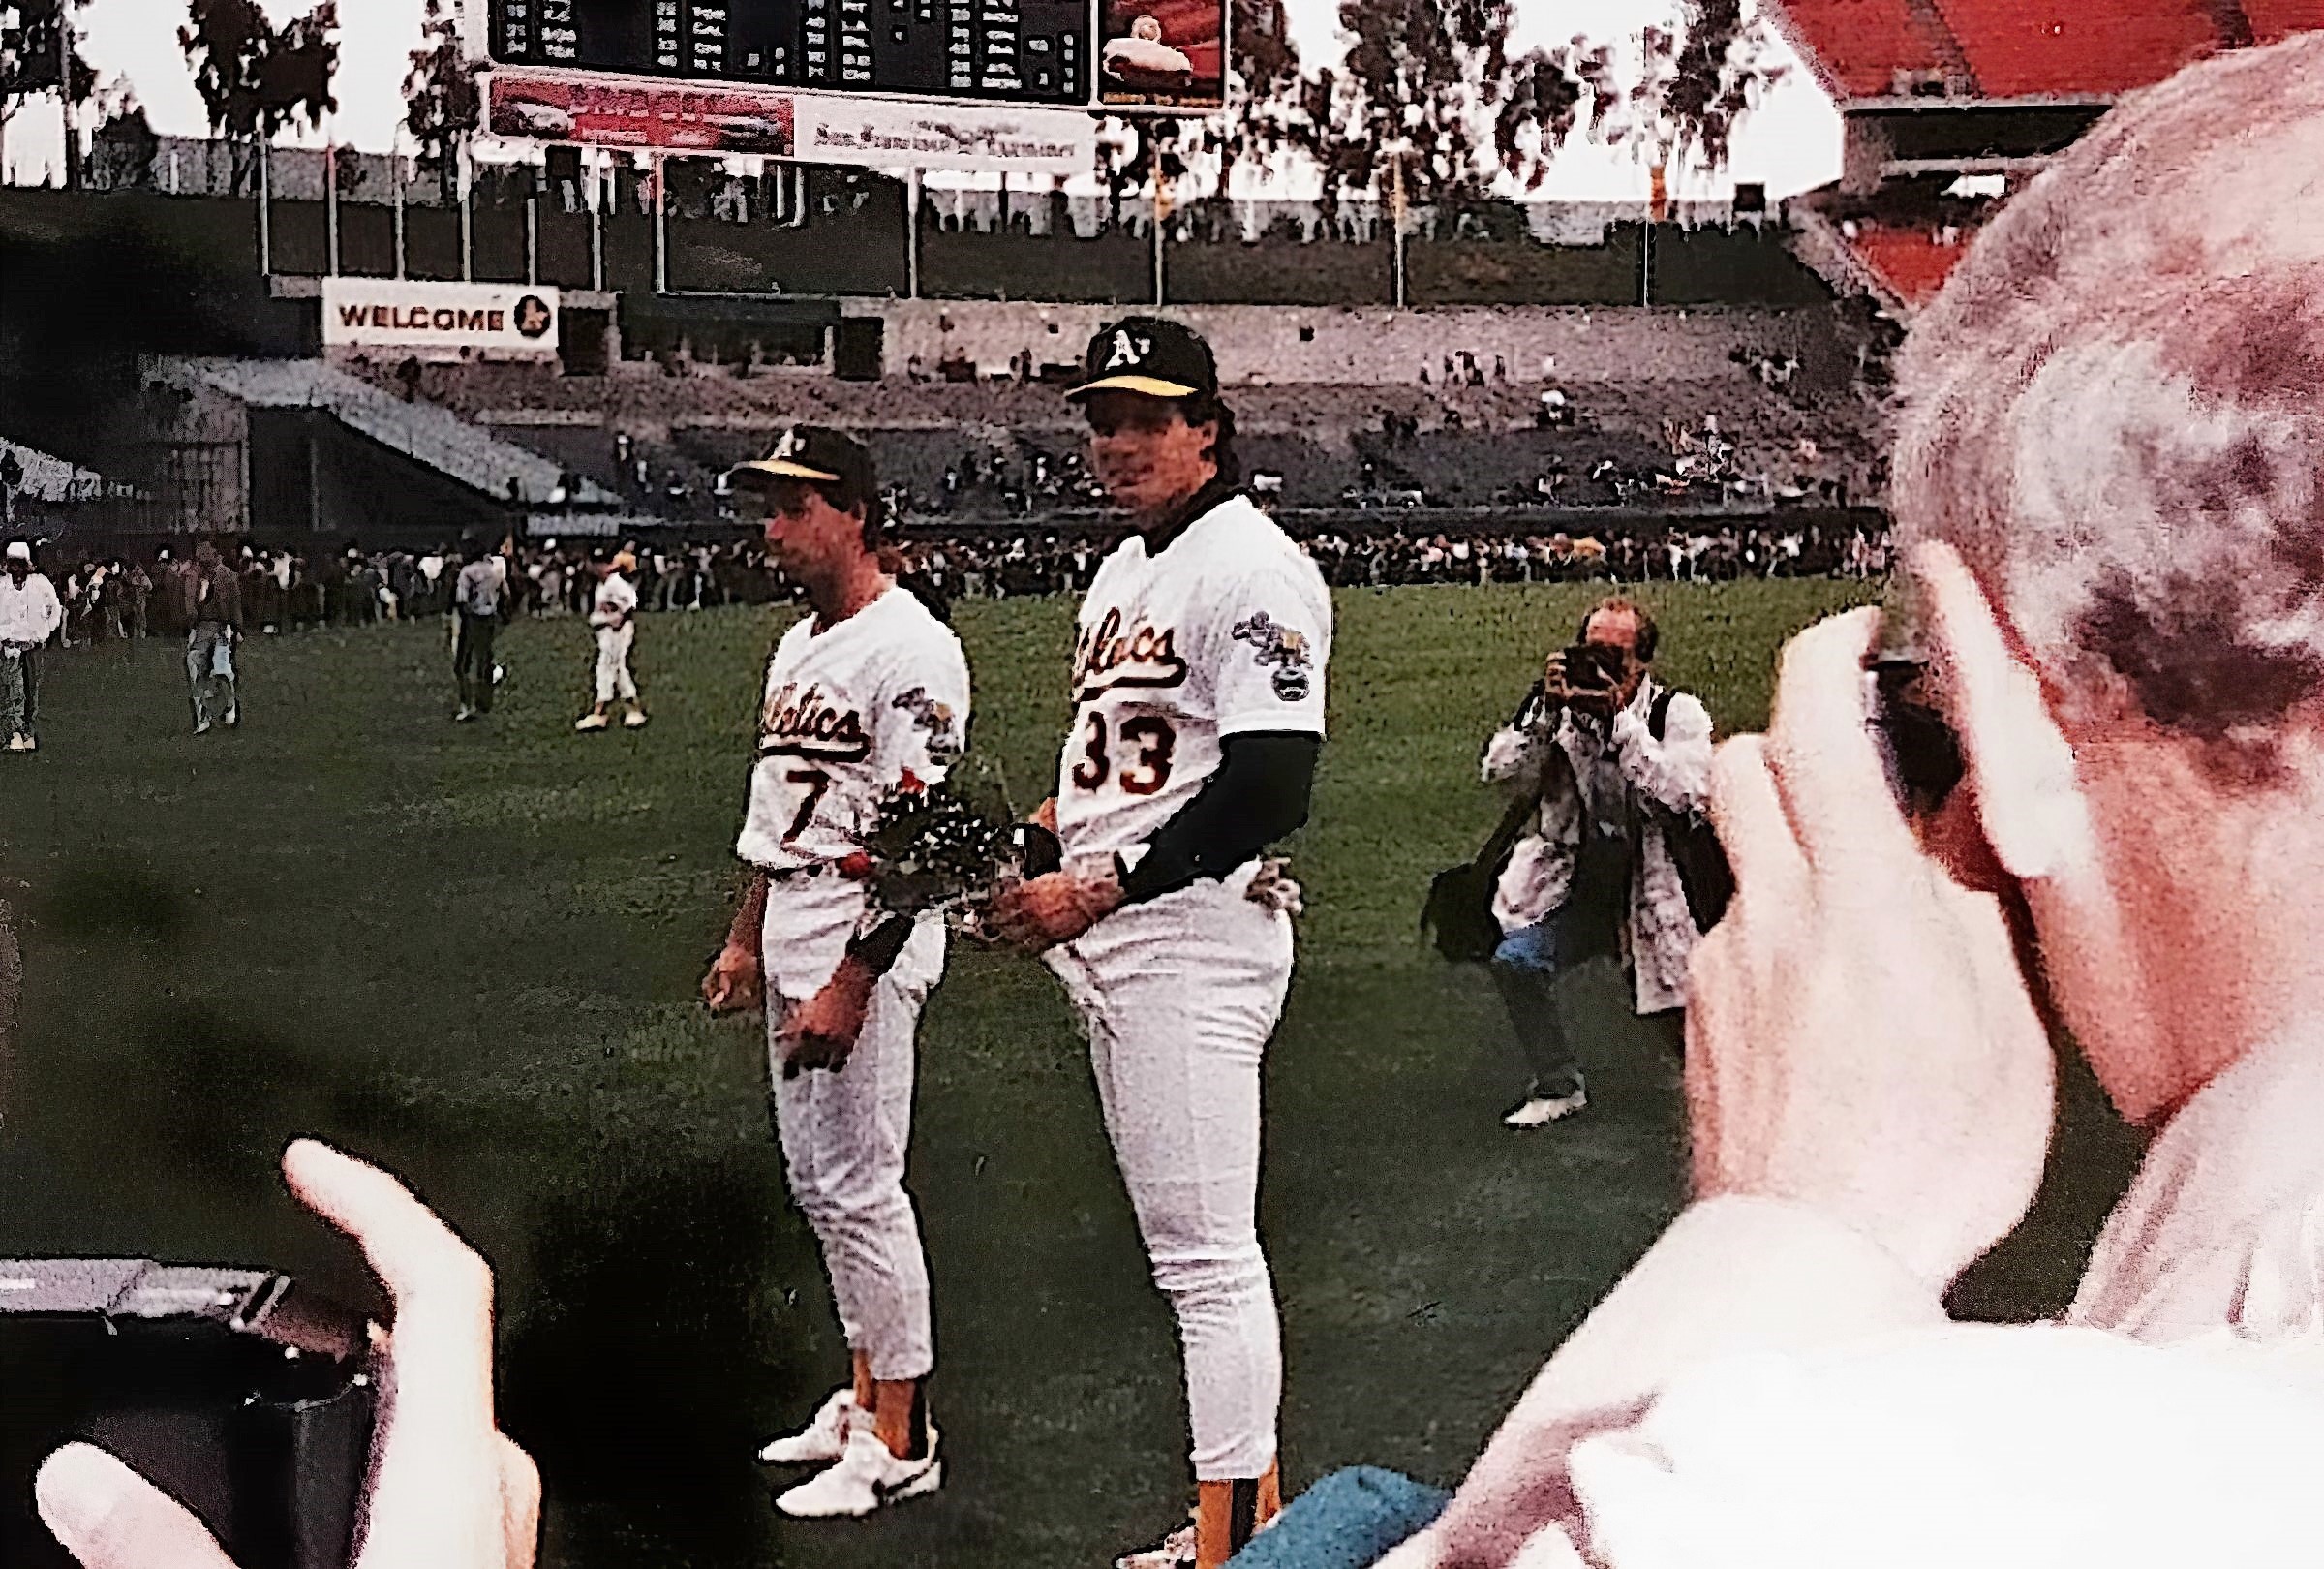 Jose Canseco Walt Weiss Oakland Coliseum